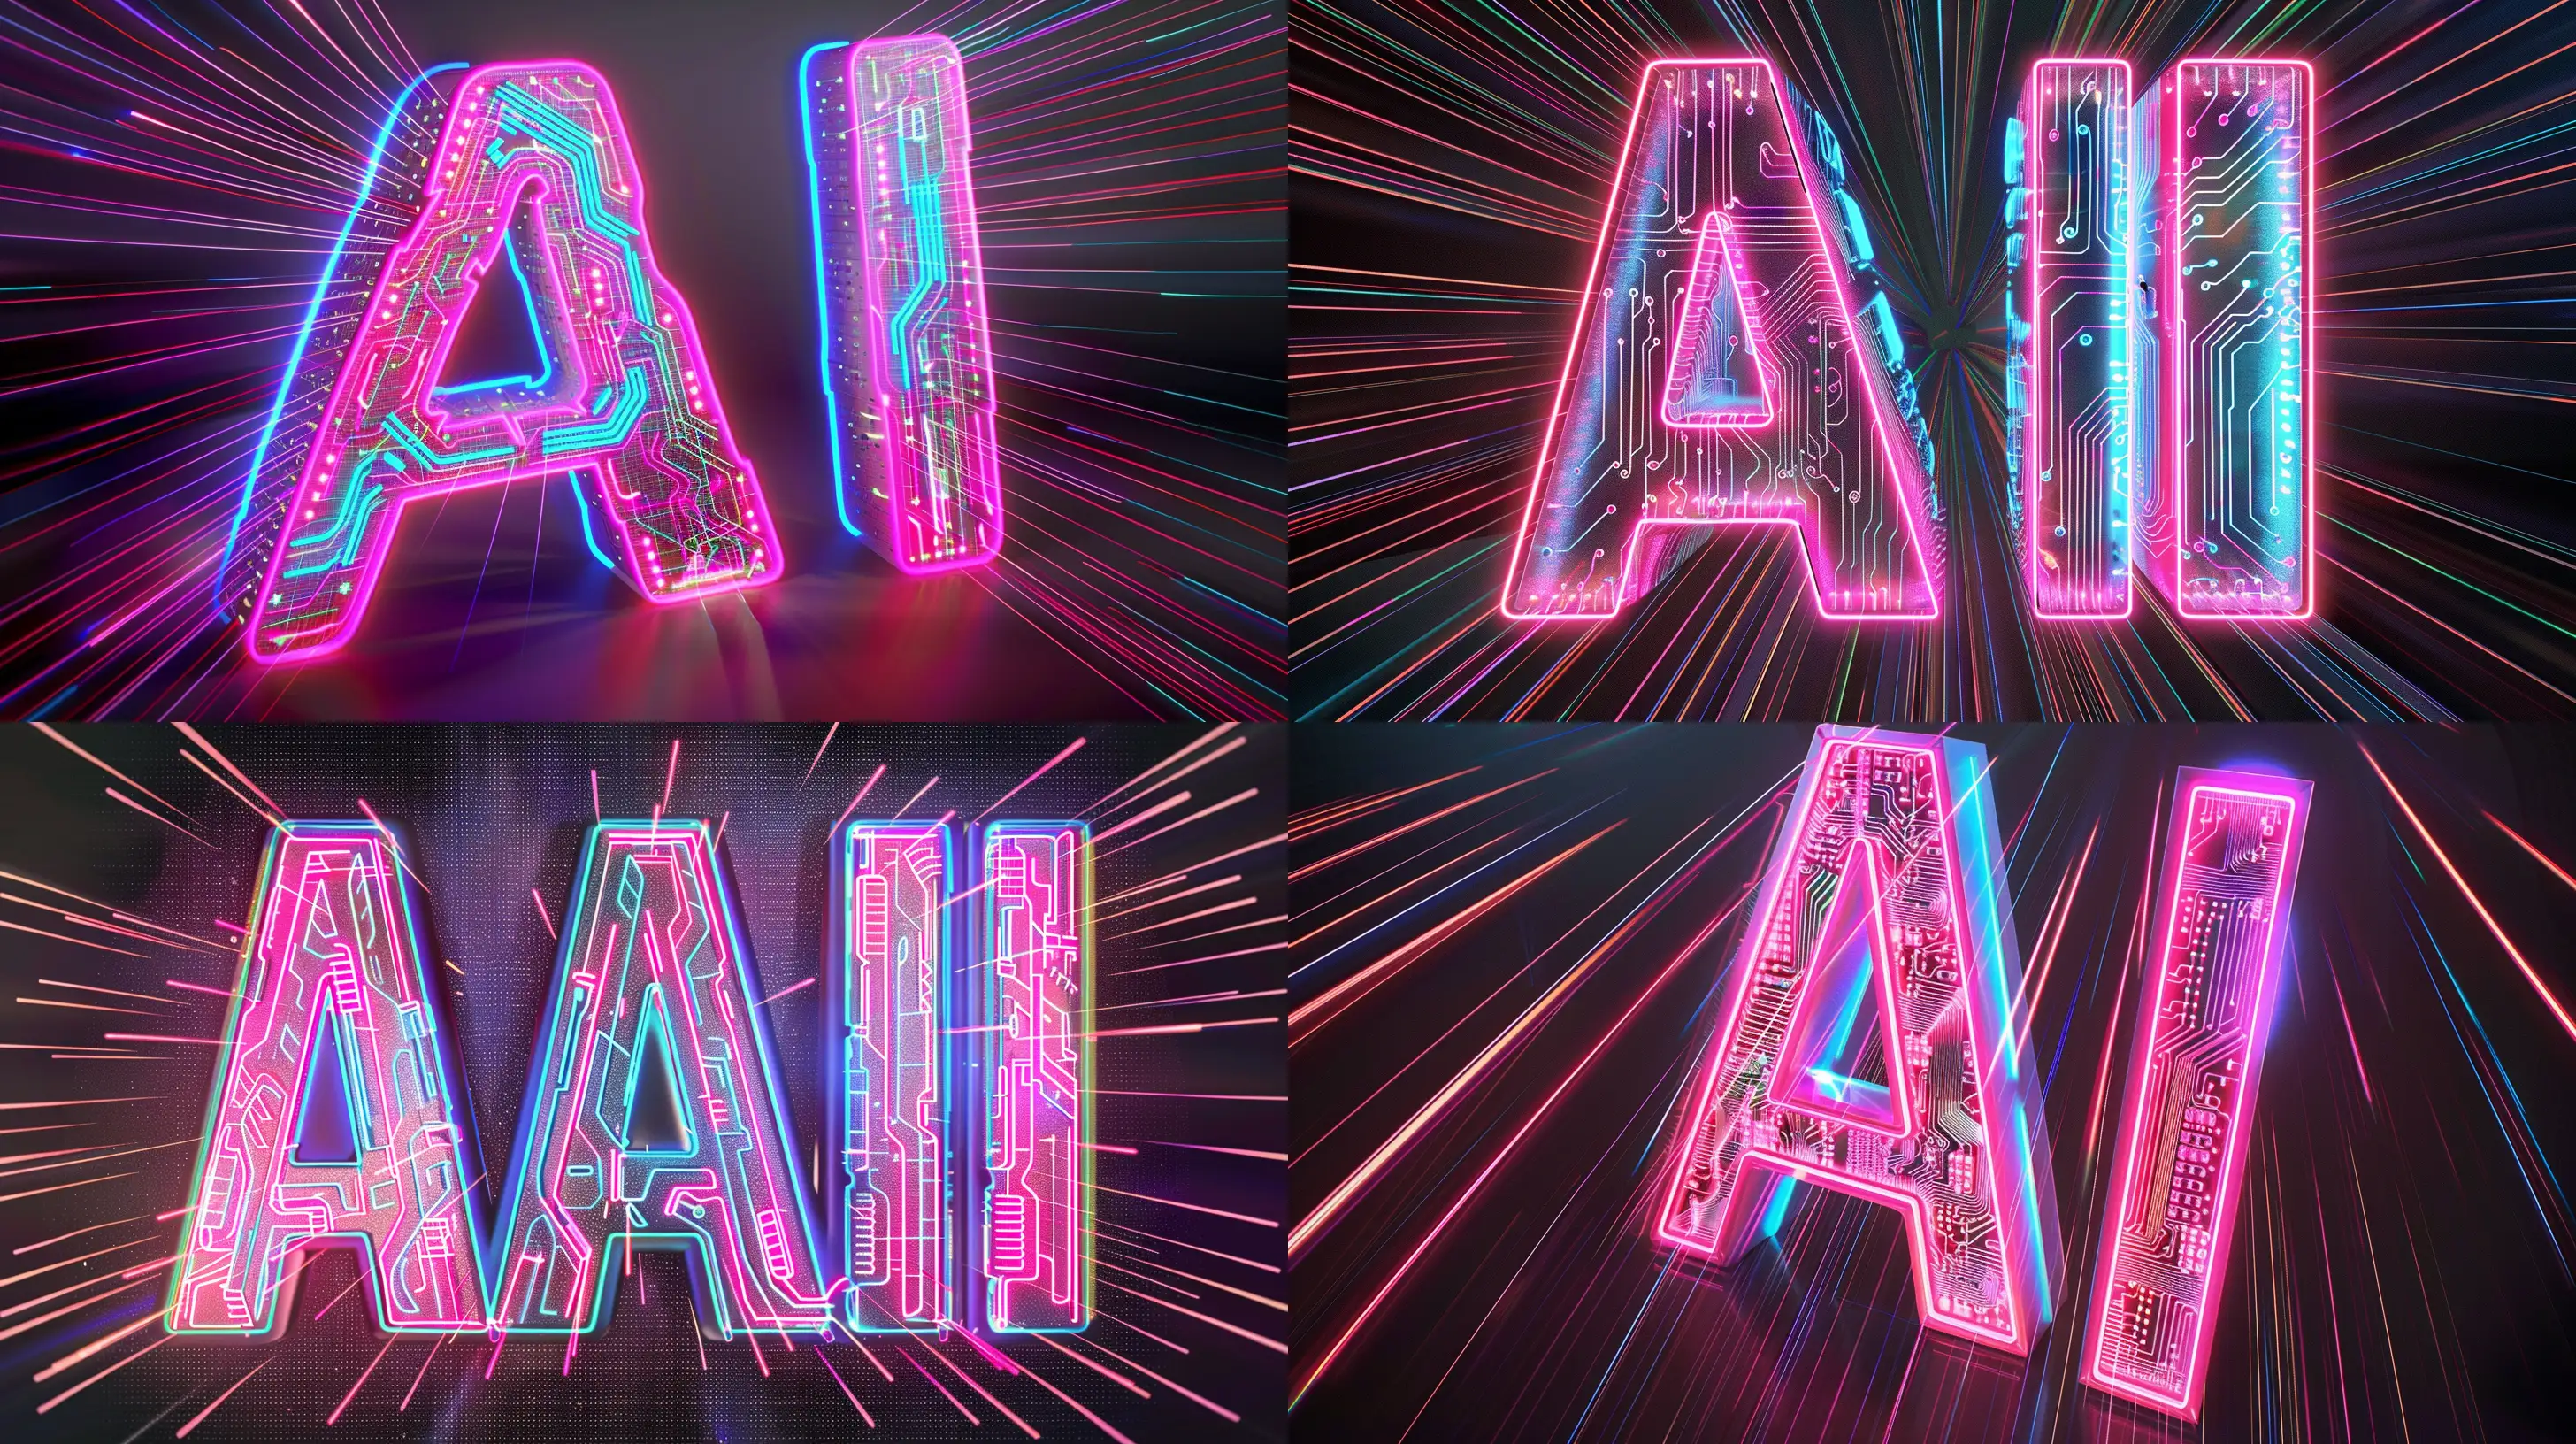 Create a 16:9 image showcasing the letters 'AI' in a glowing neon style, filled with a circuit board pattern. The letters should be brightly illuminated with pink and blue neon lights, casting rays against a dark background to emphasize the concept of artificial intelligence and technology --ar 16:9